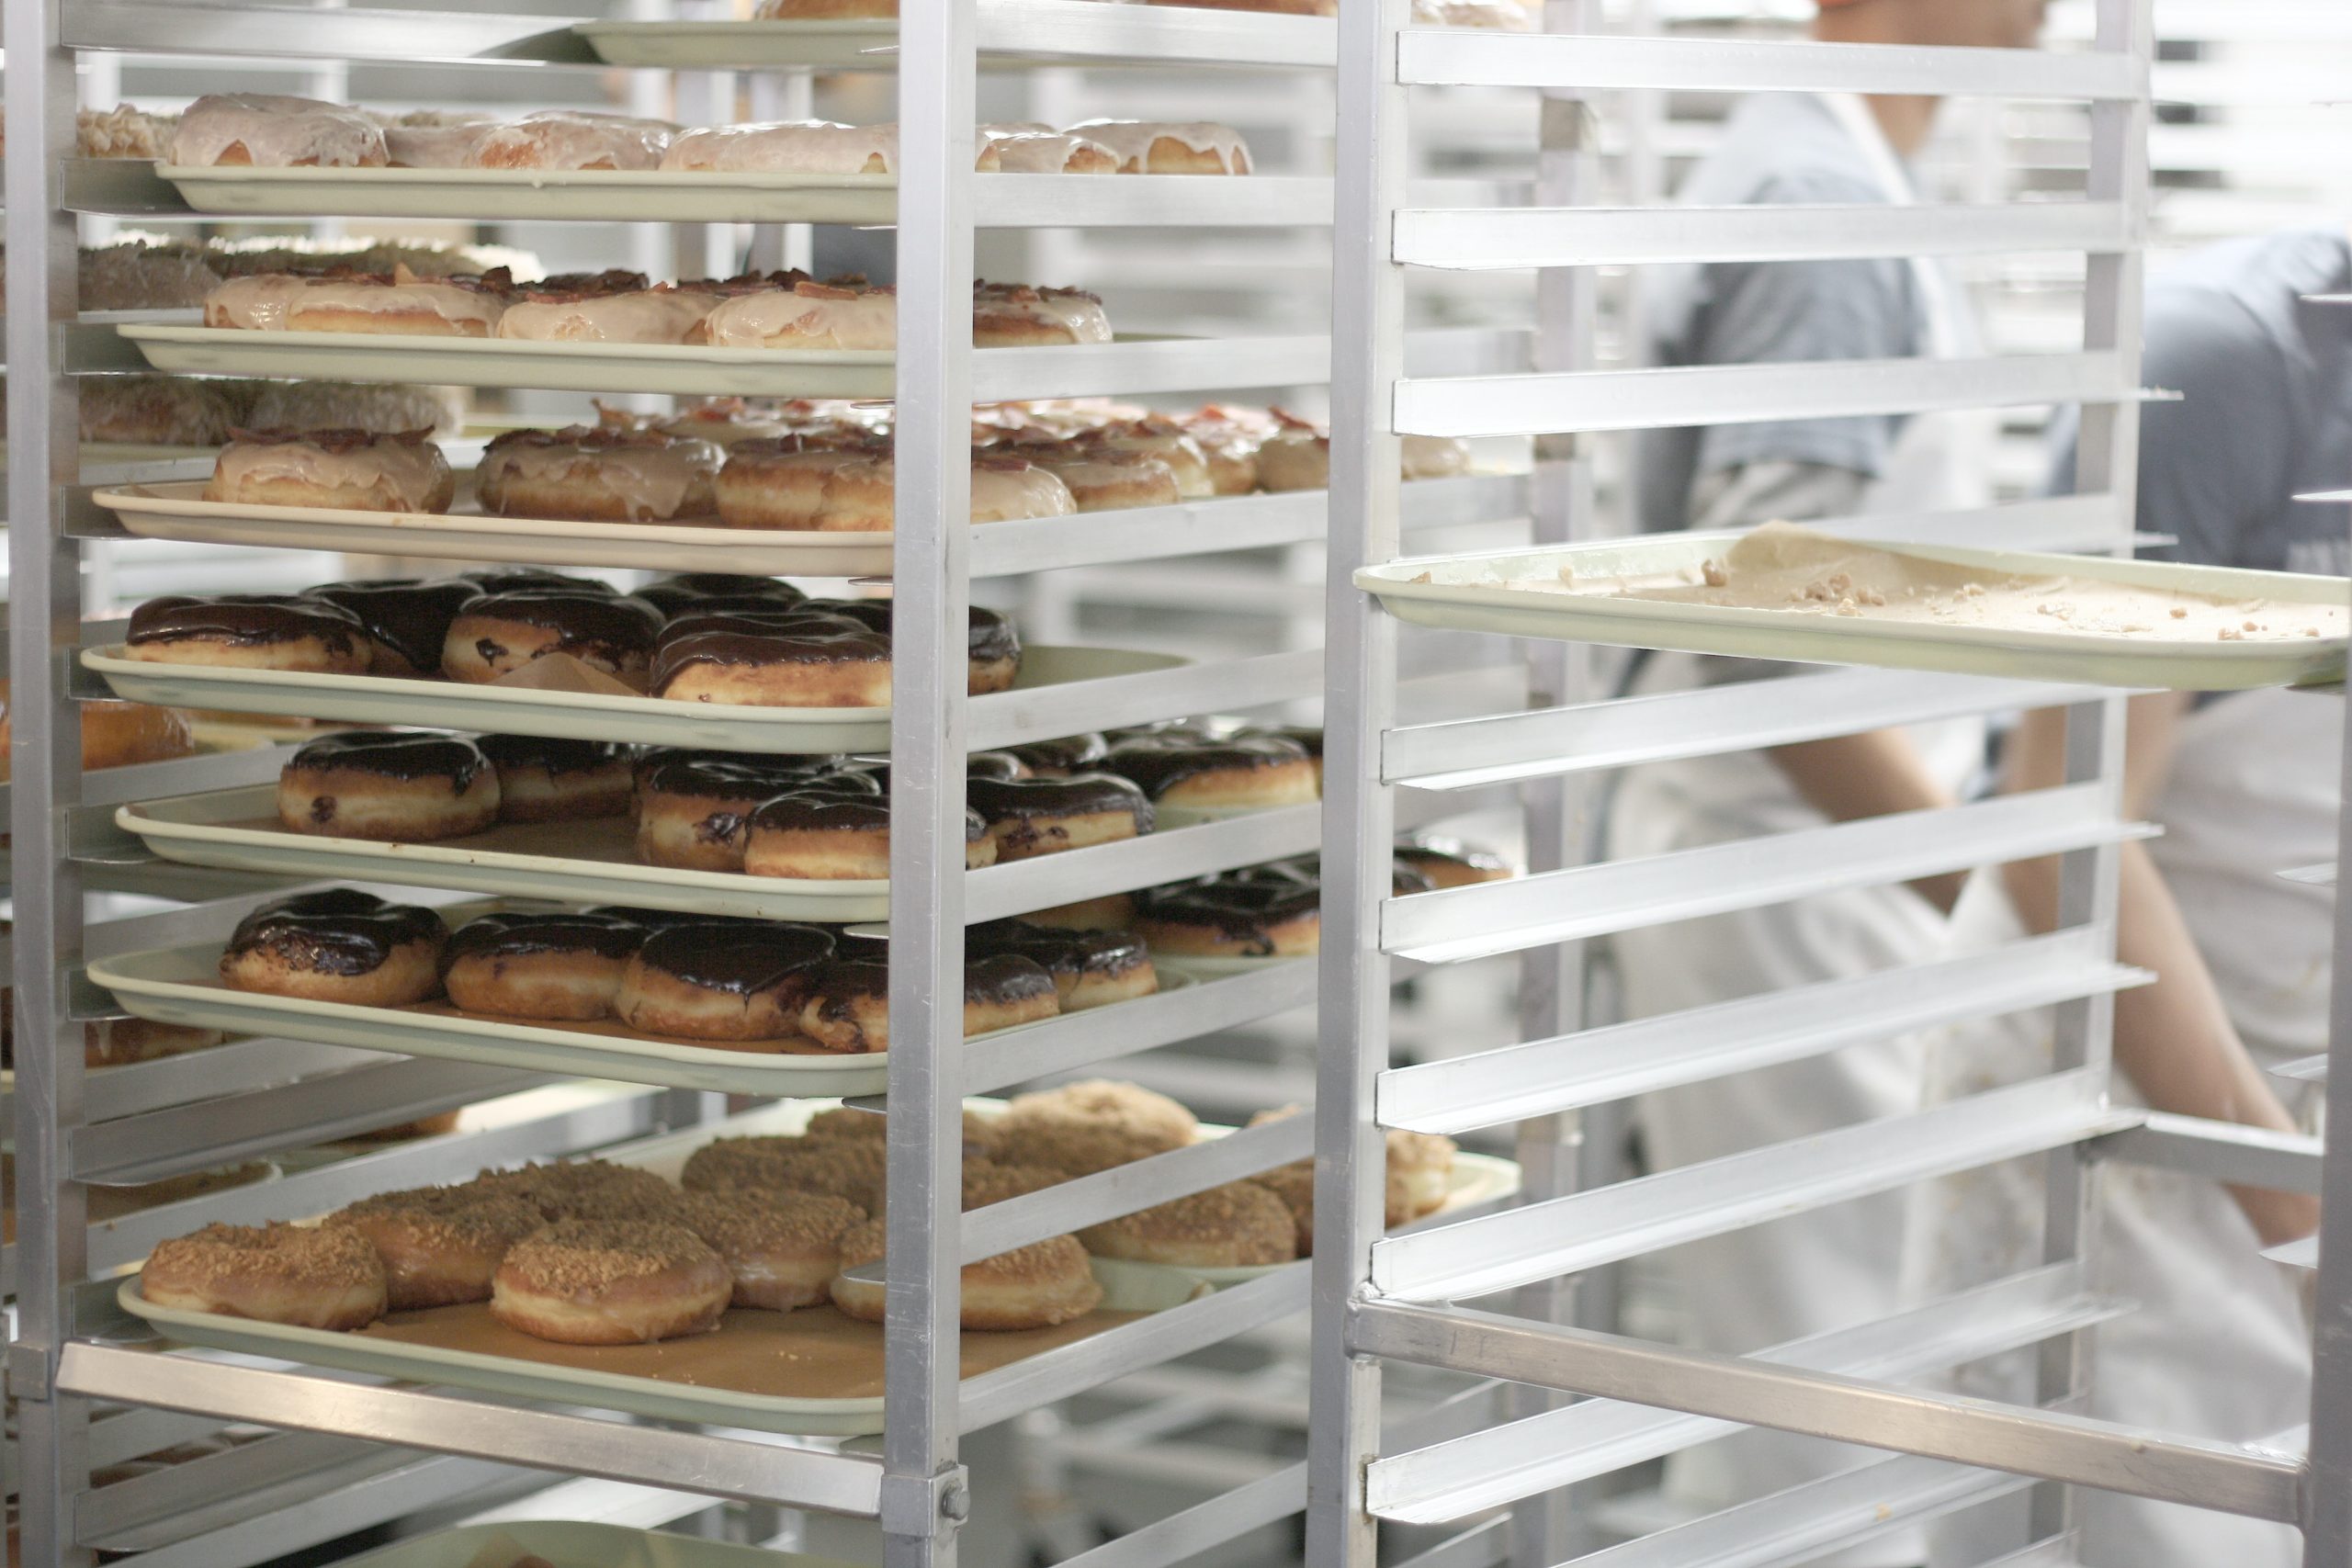 An image of donuts cooling on racks in the back of a franchise donut shop